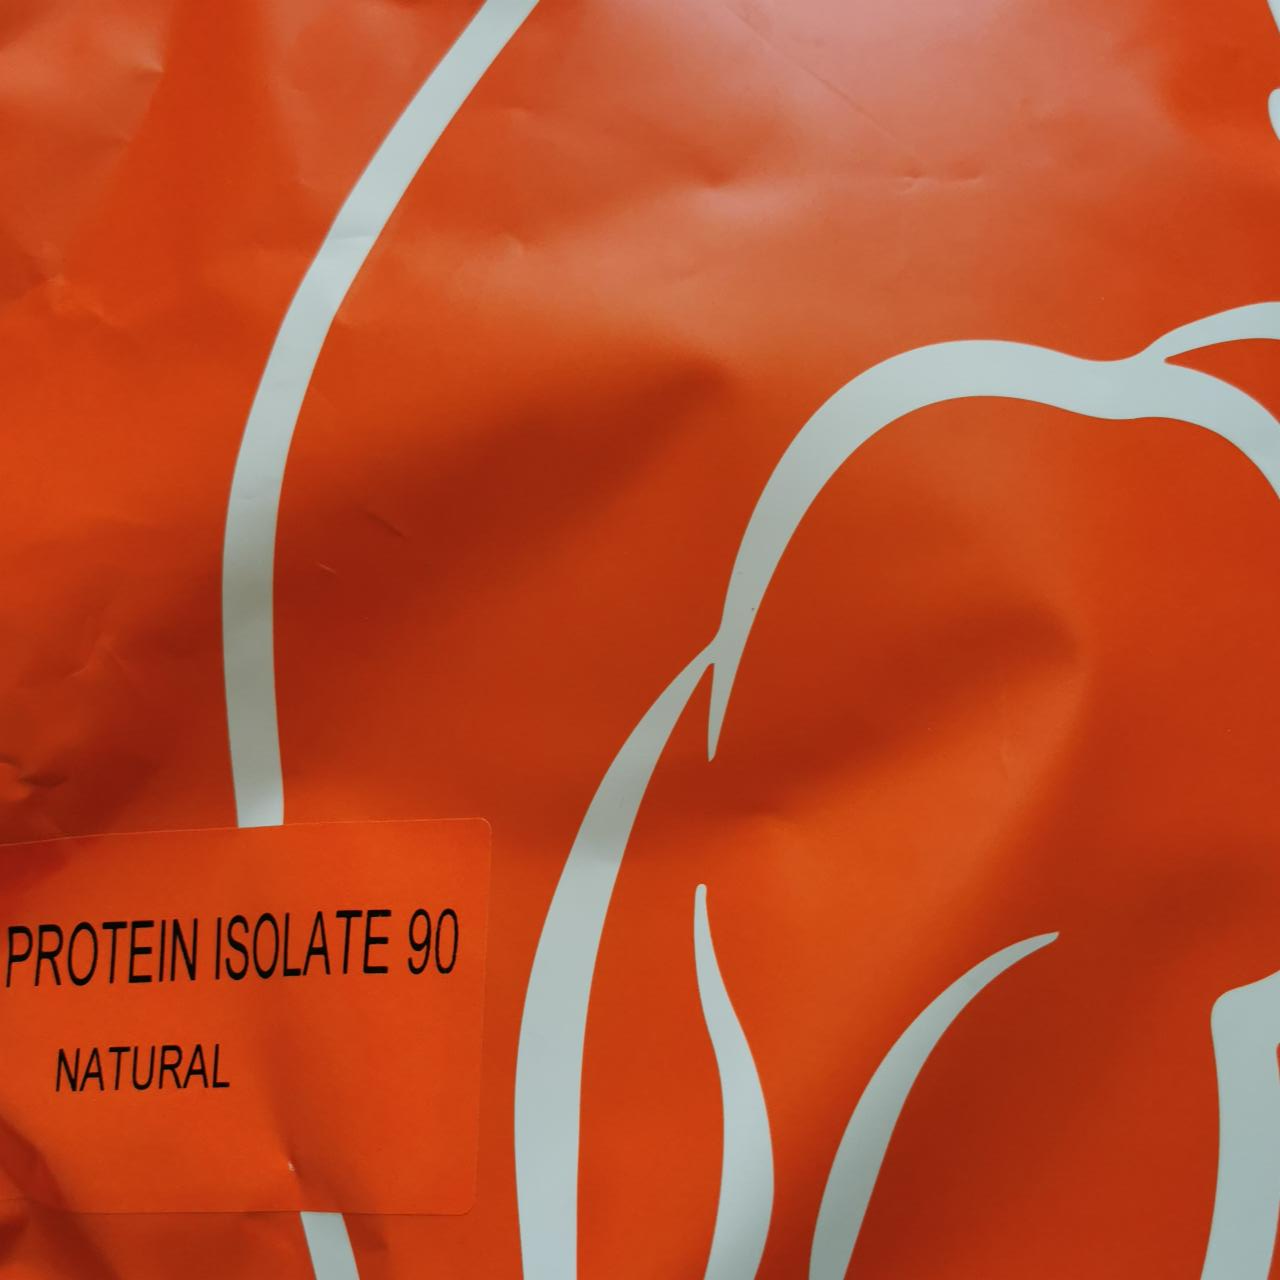 Fotografie - Whey protein isolate 90 natural